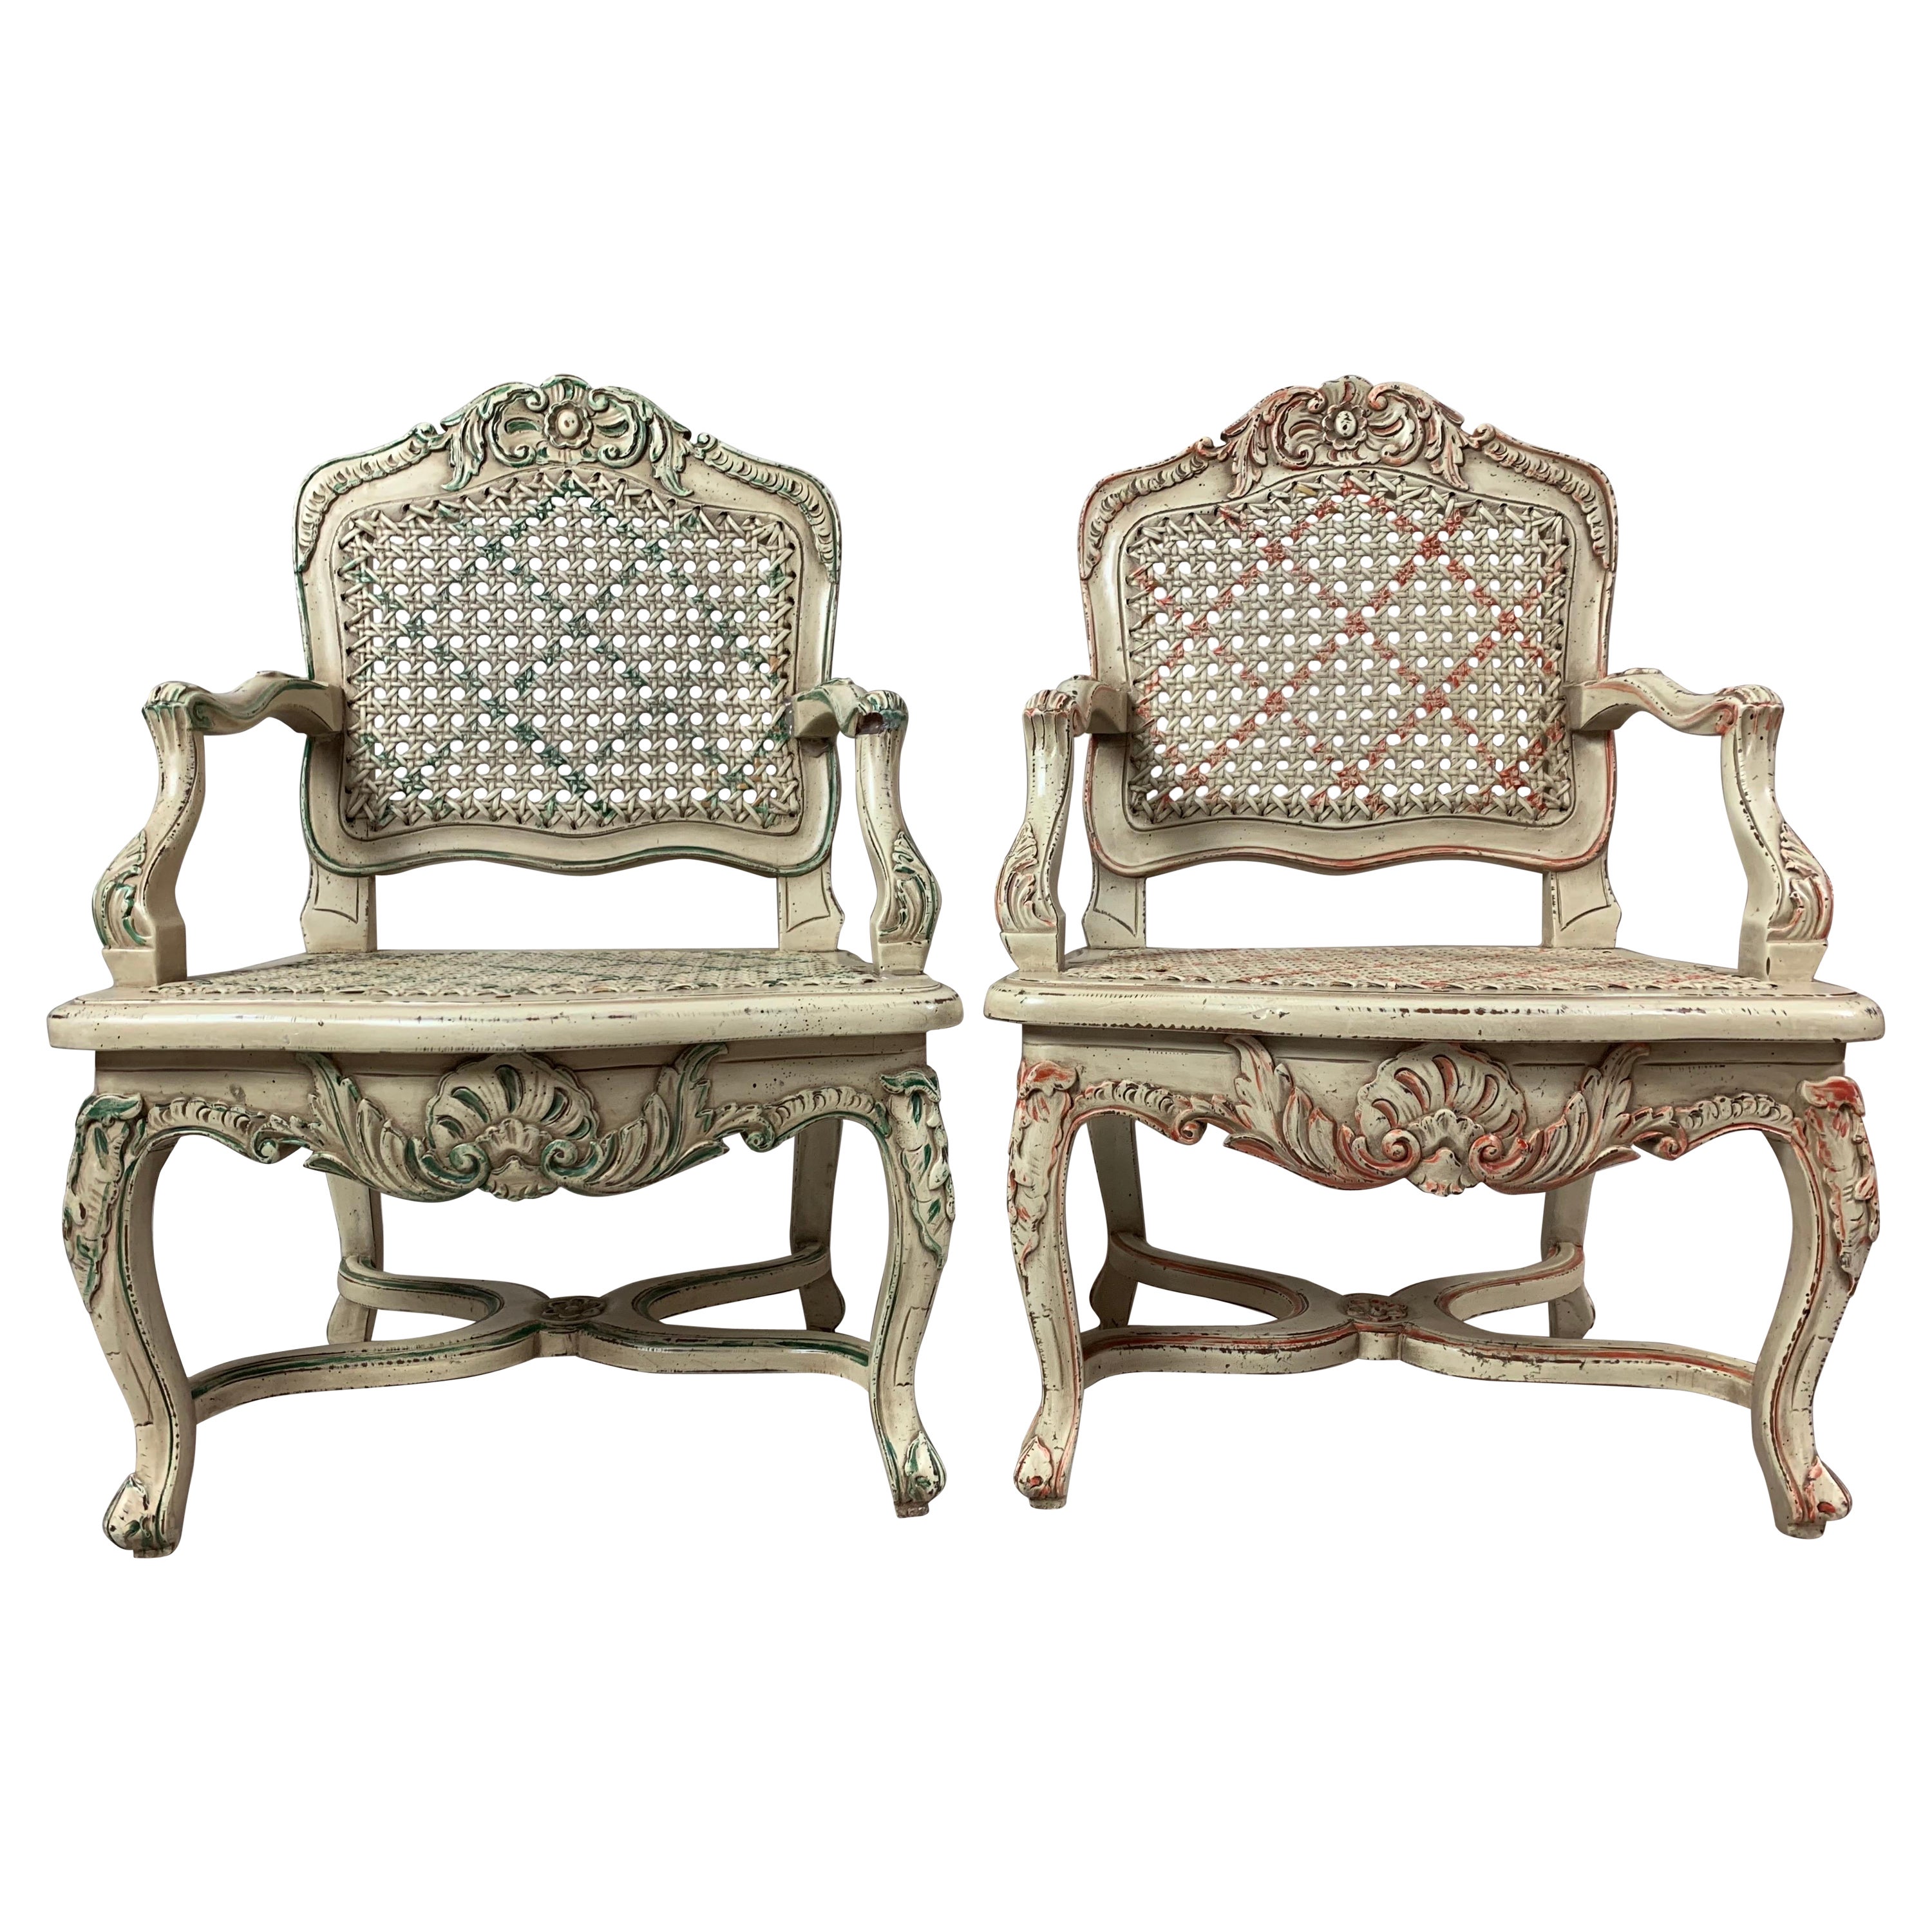 Pair of Miniature/Doll Size Louis XVI Caned Bergere Fauteuil Arm Chairs